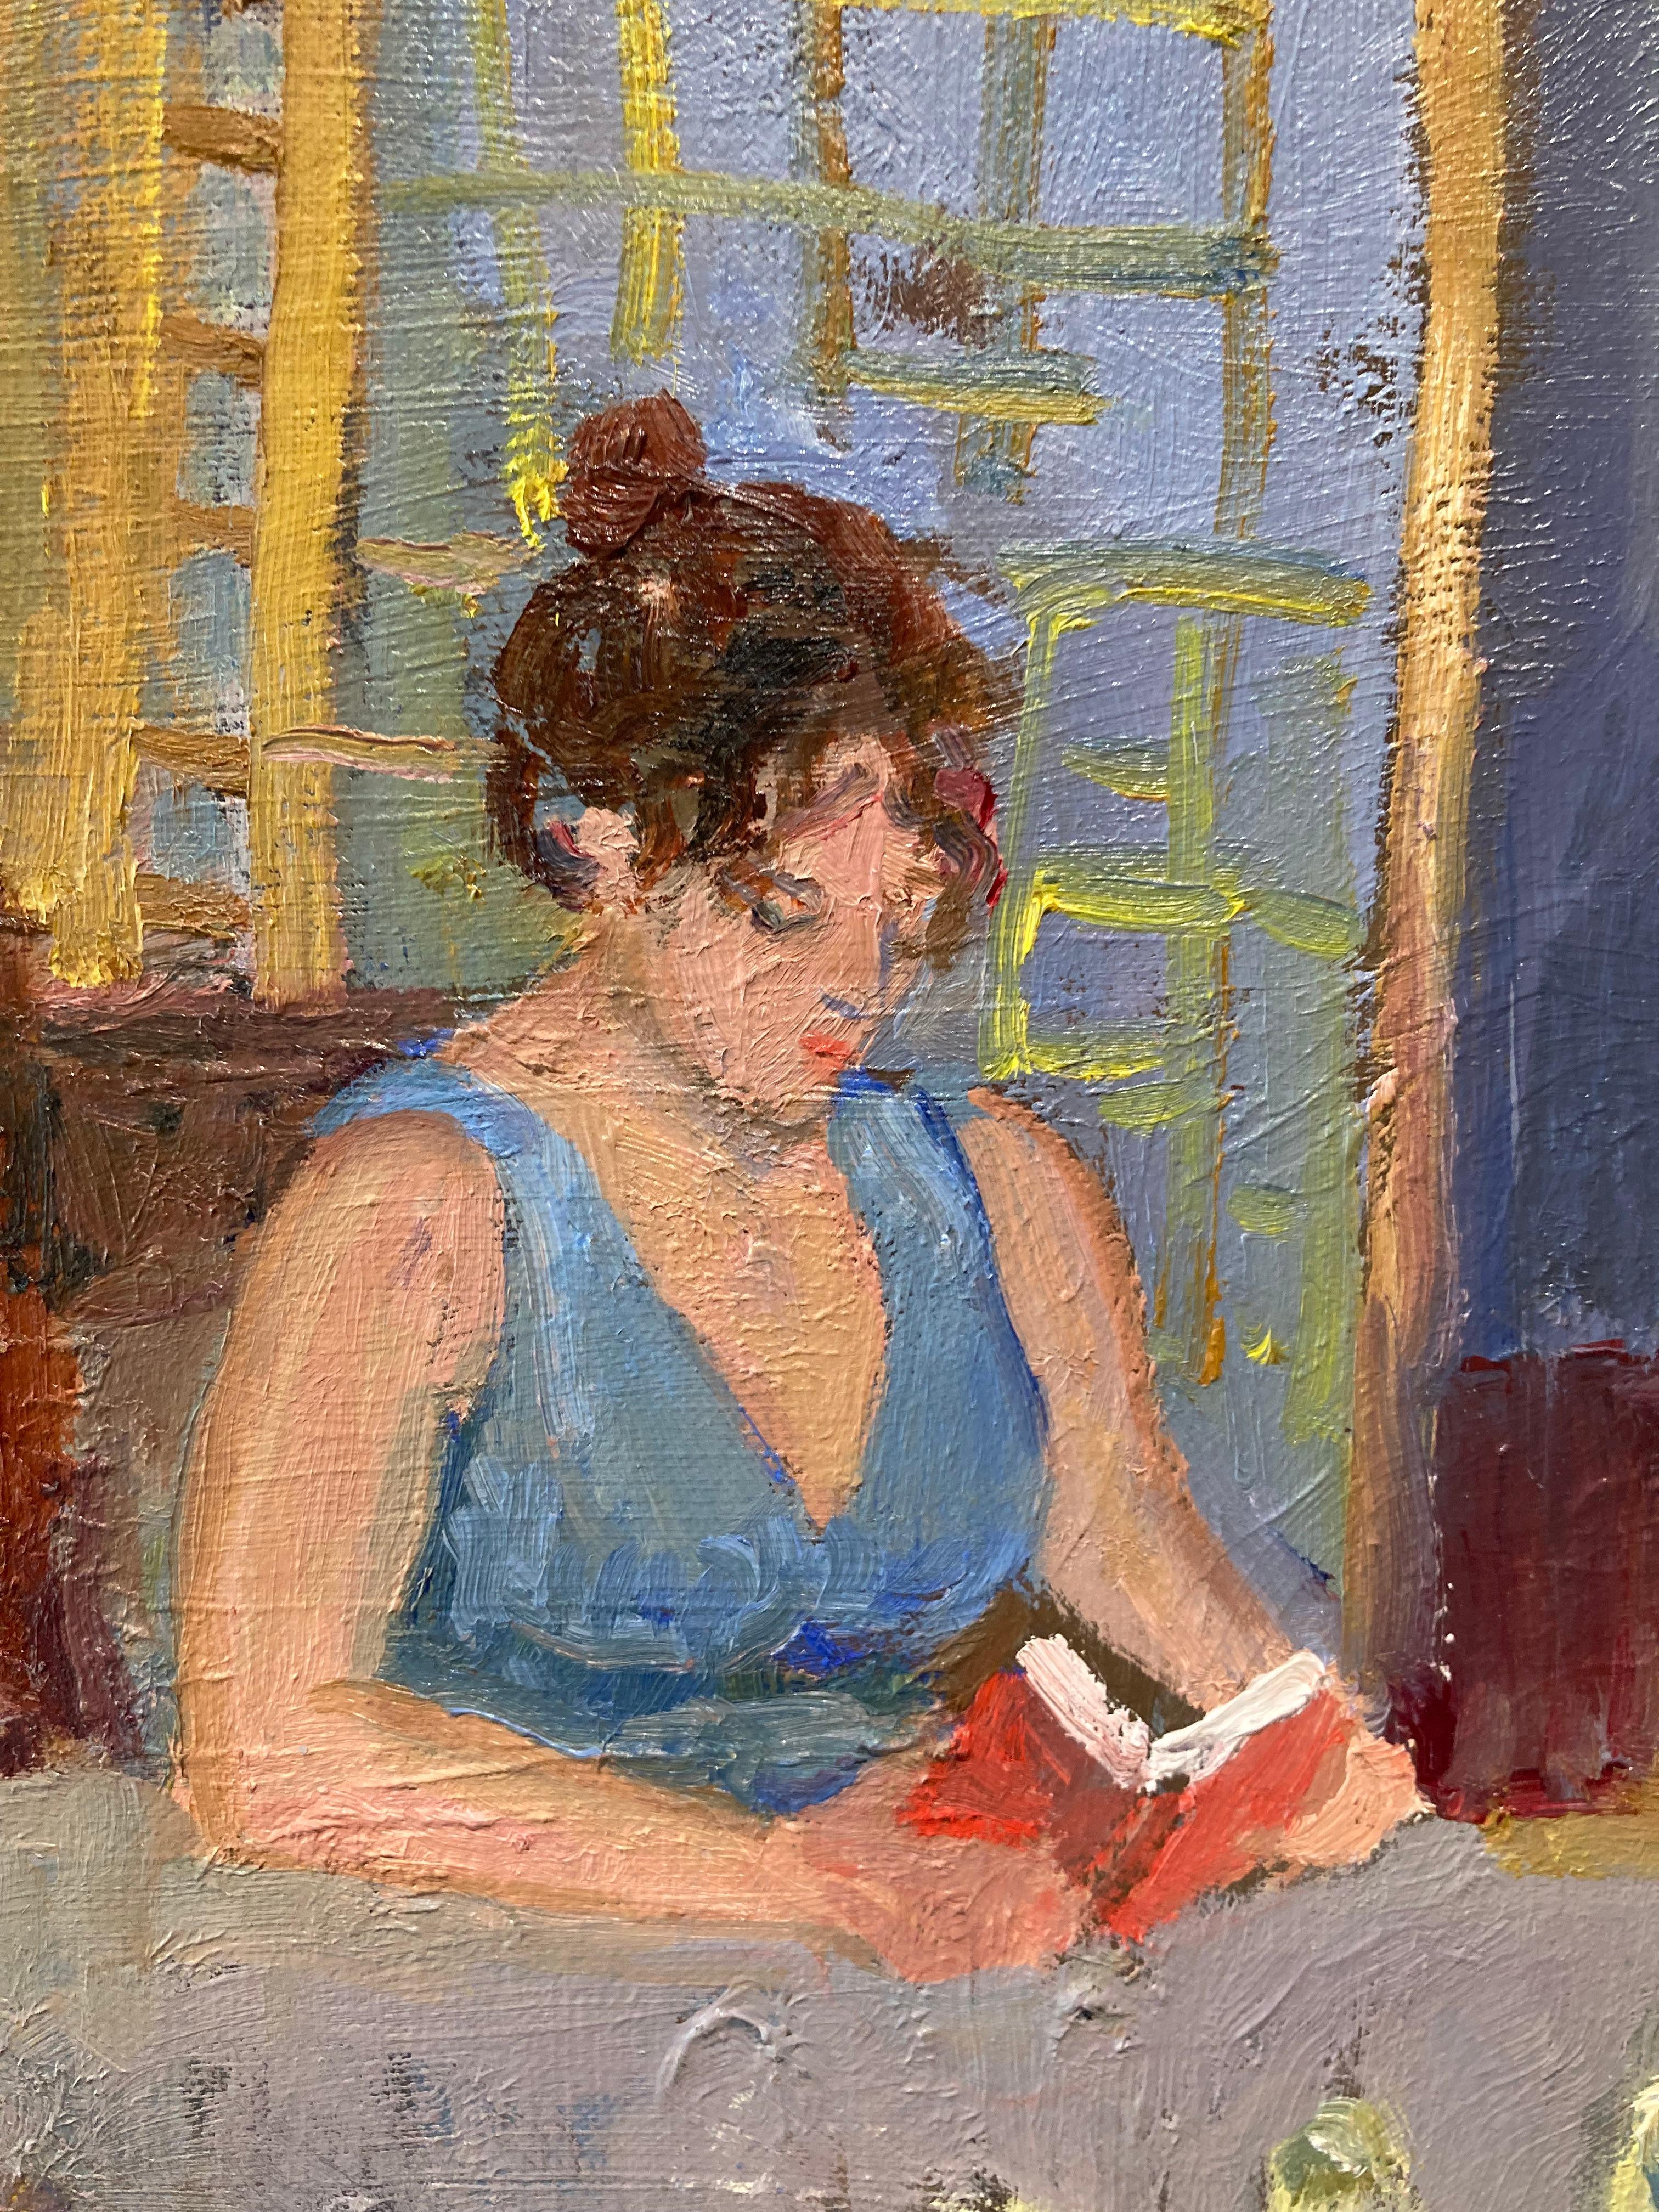 Carmody composes a dynamic interior scene in this depiction of a girl reading at her table. Carmody, trained as a realist, now works in a more free, impressionistic style. Her impressionist influence is visible in the high viewpoint, shortening the